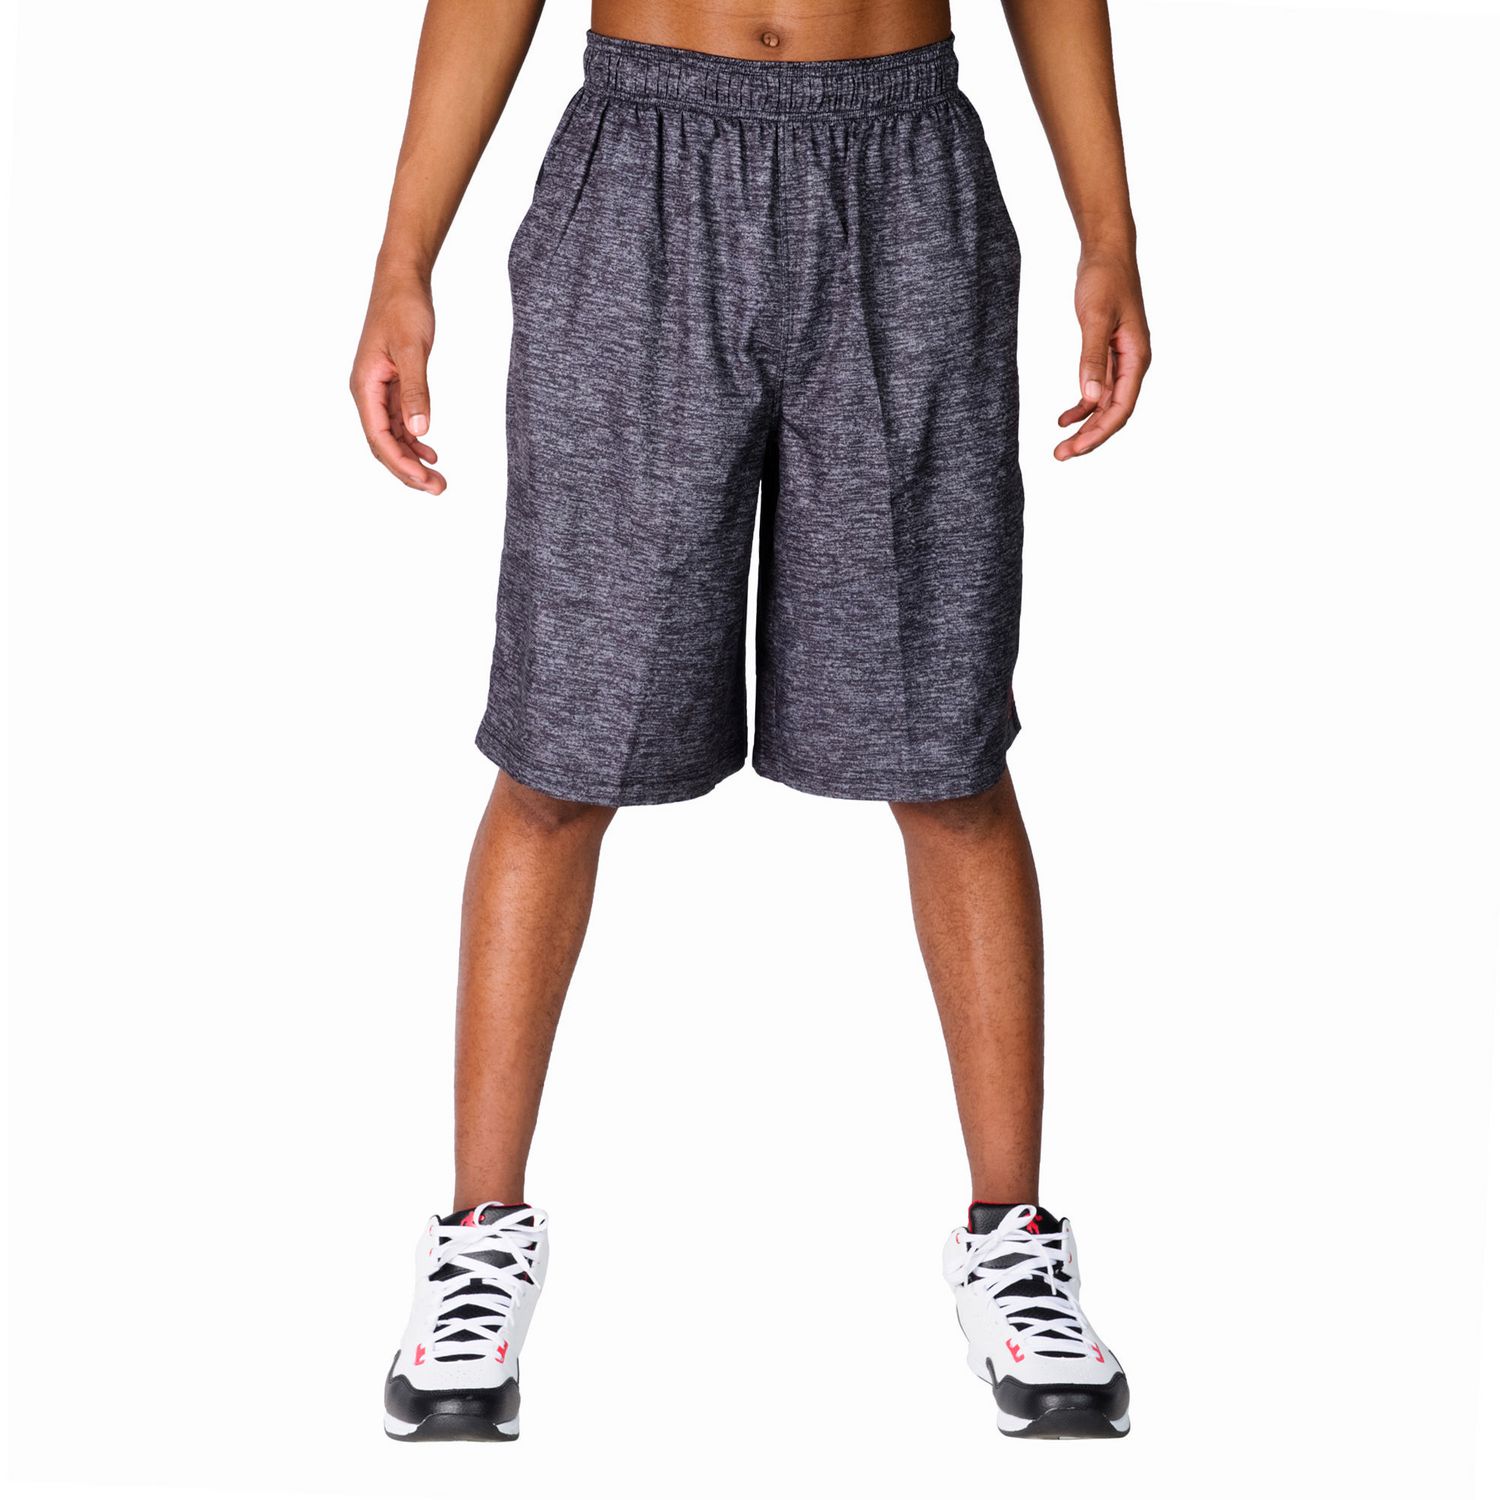 AND1 Men’s post Game 2.0 Shorts | Walmart Canada